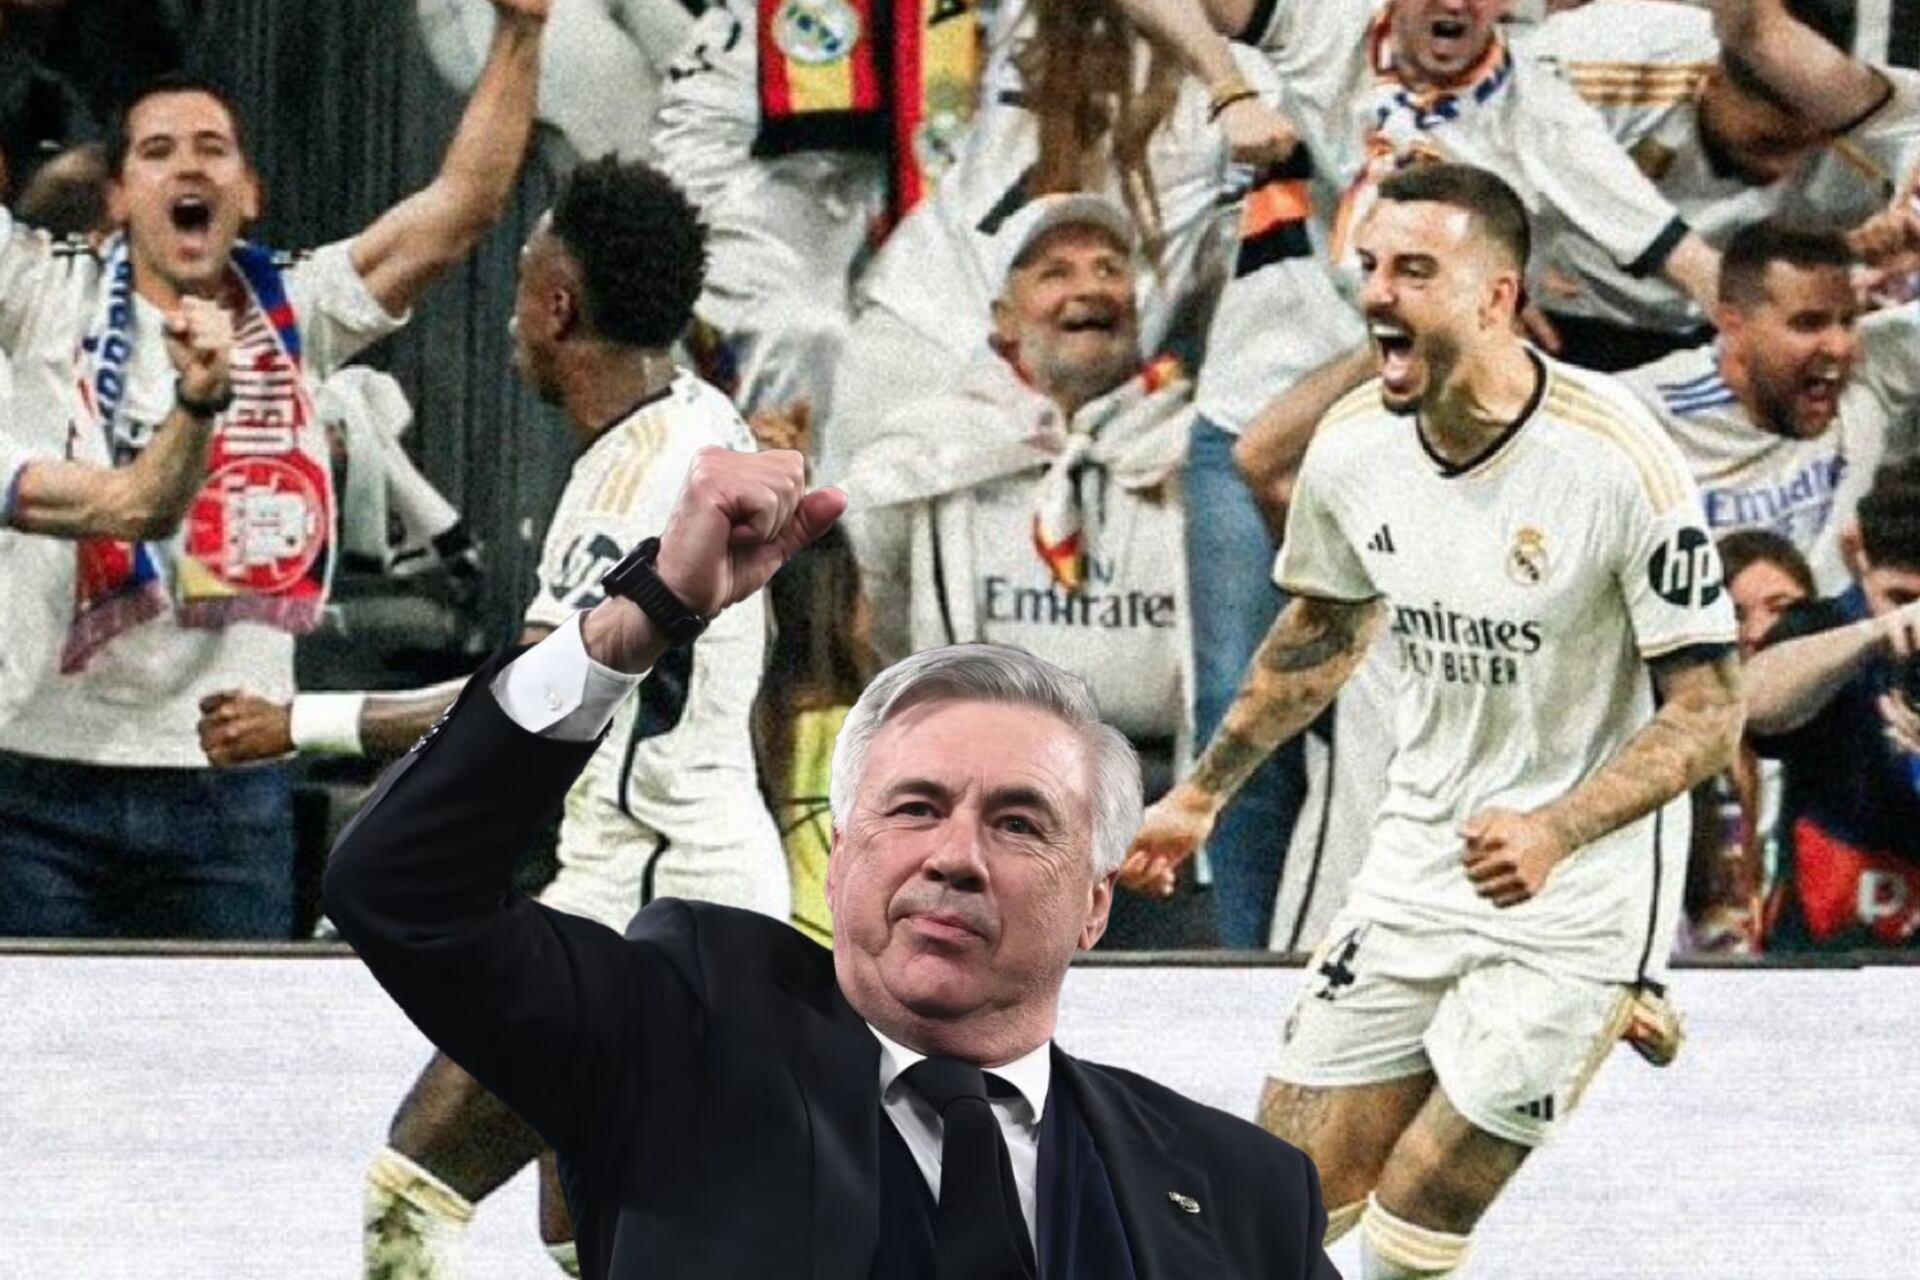 (VIDEO) Real Madrid is in the Champions League final after beating Bayern, the most euphoric celebration of Ancelotti